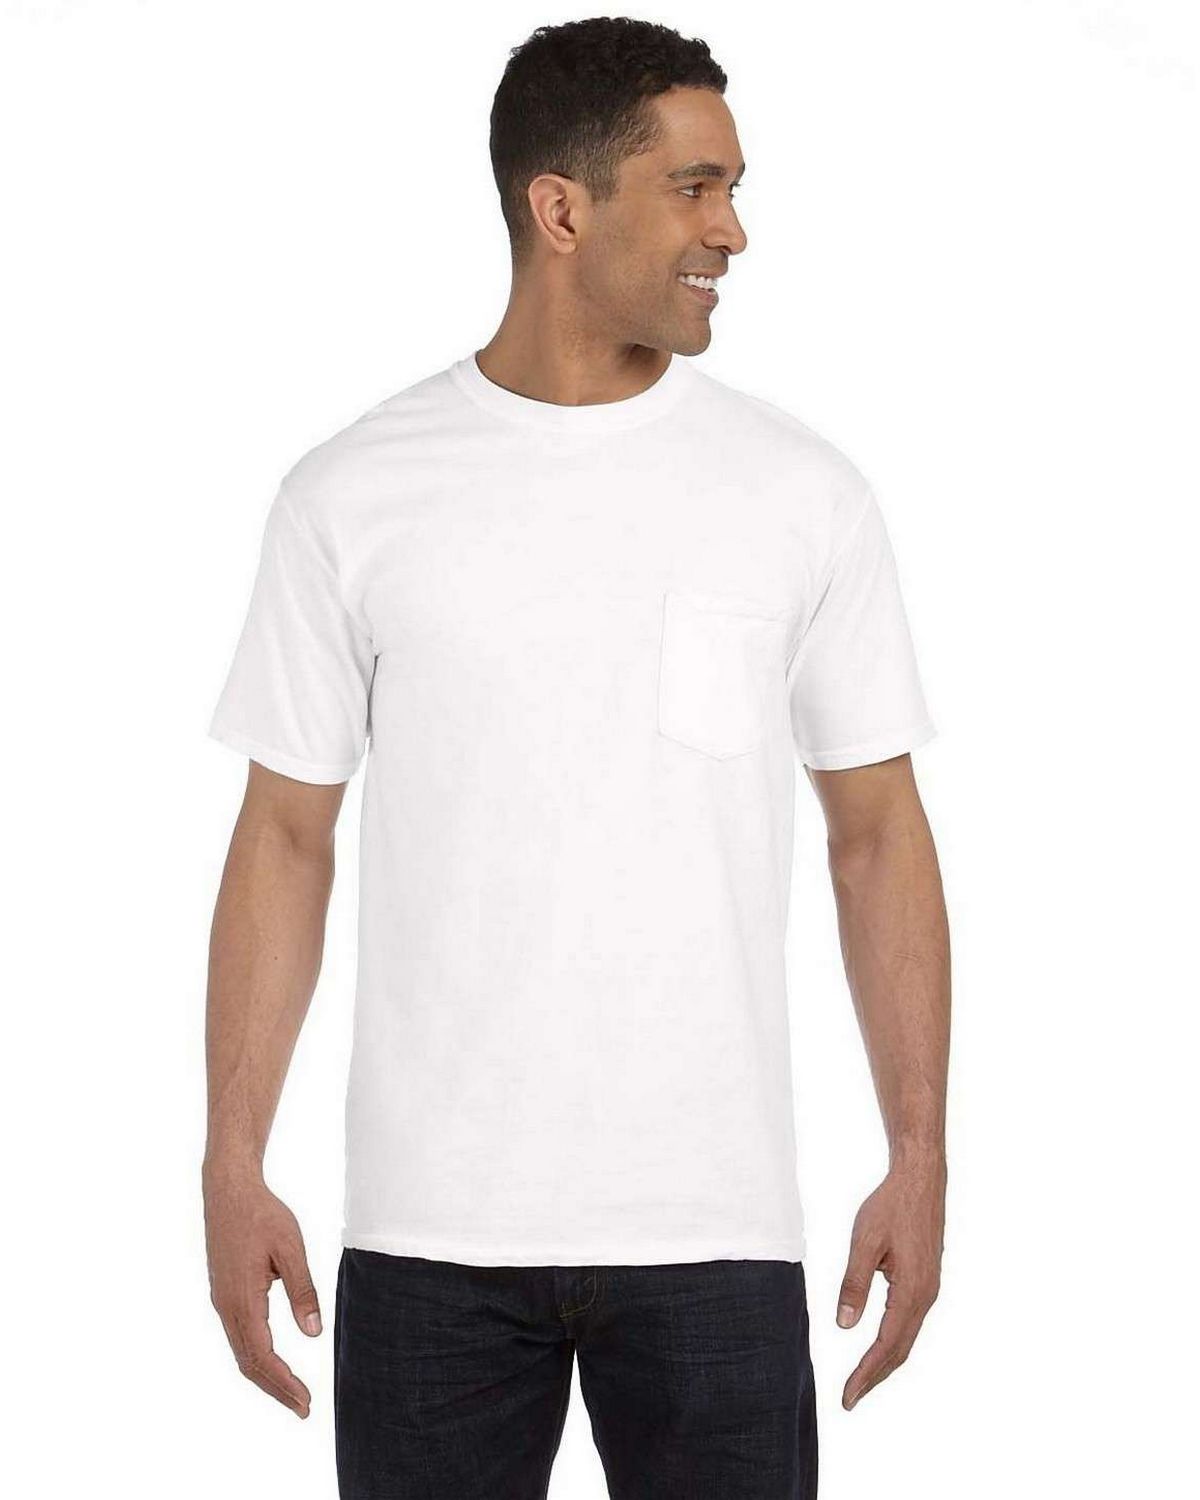 Size Chart For Comfort Colors 6030cc Garment Dyed Pocket T Shirt